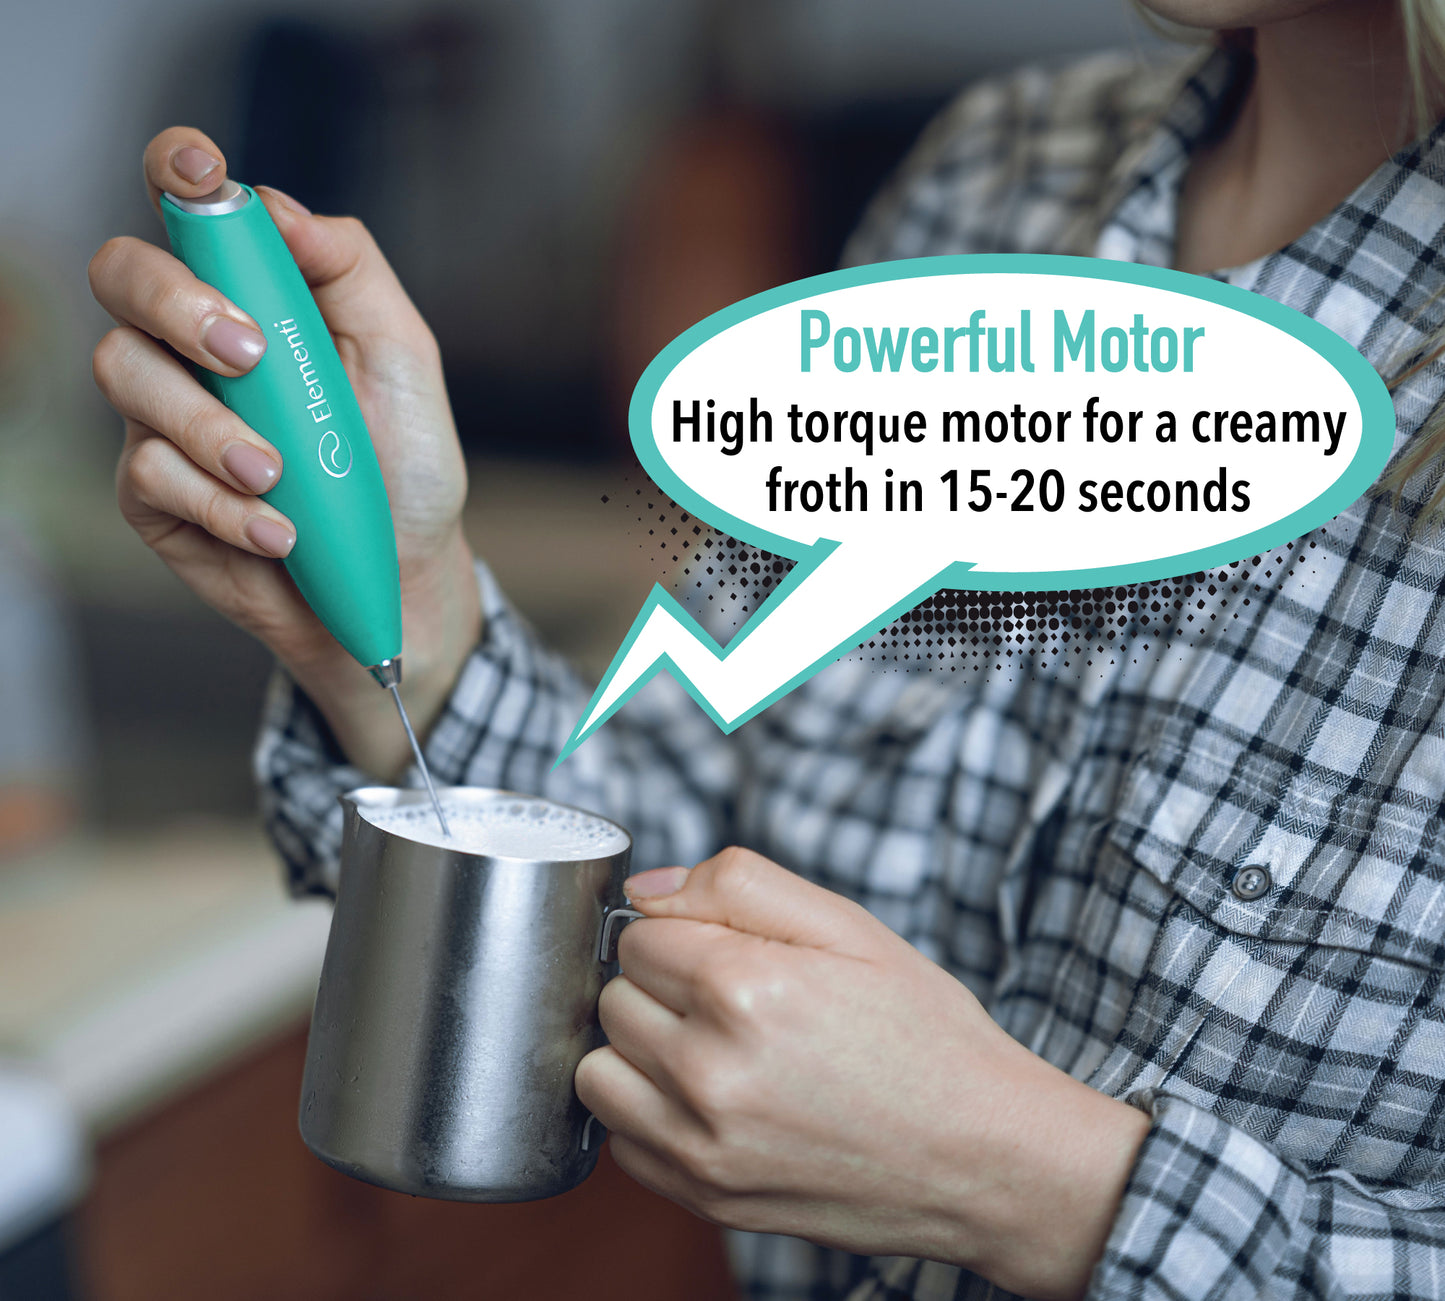 Elementi Electric Milk Frother Handheld (Mint Green)